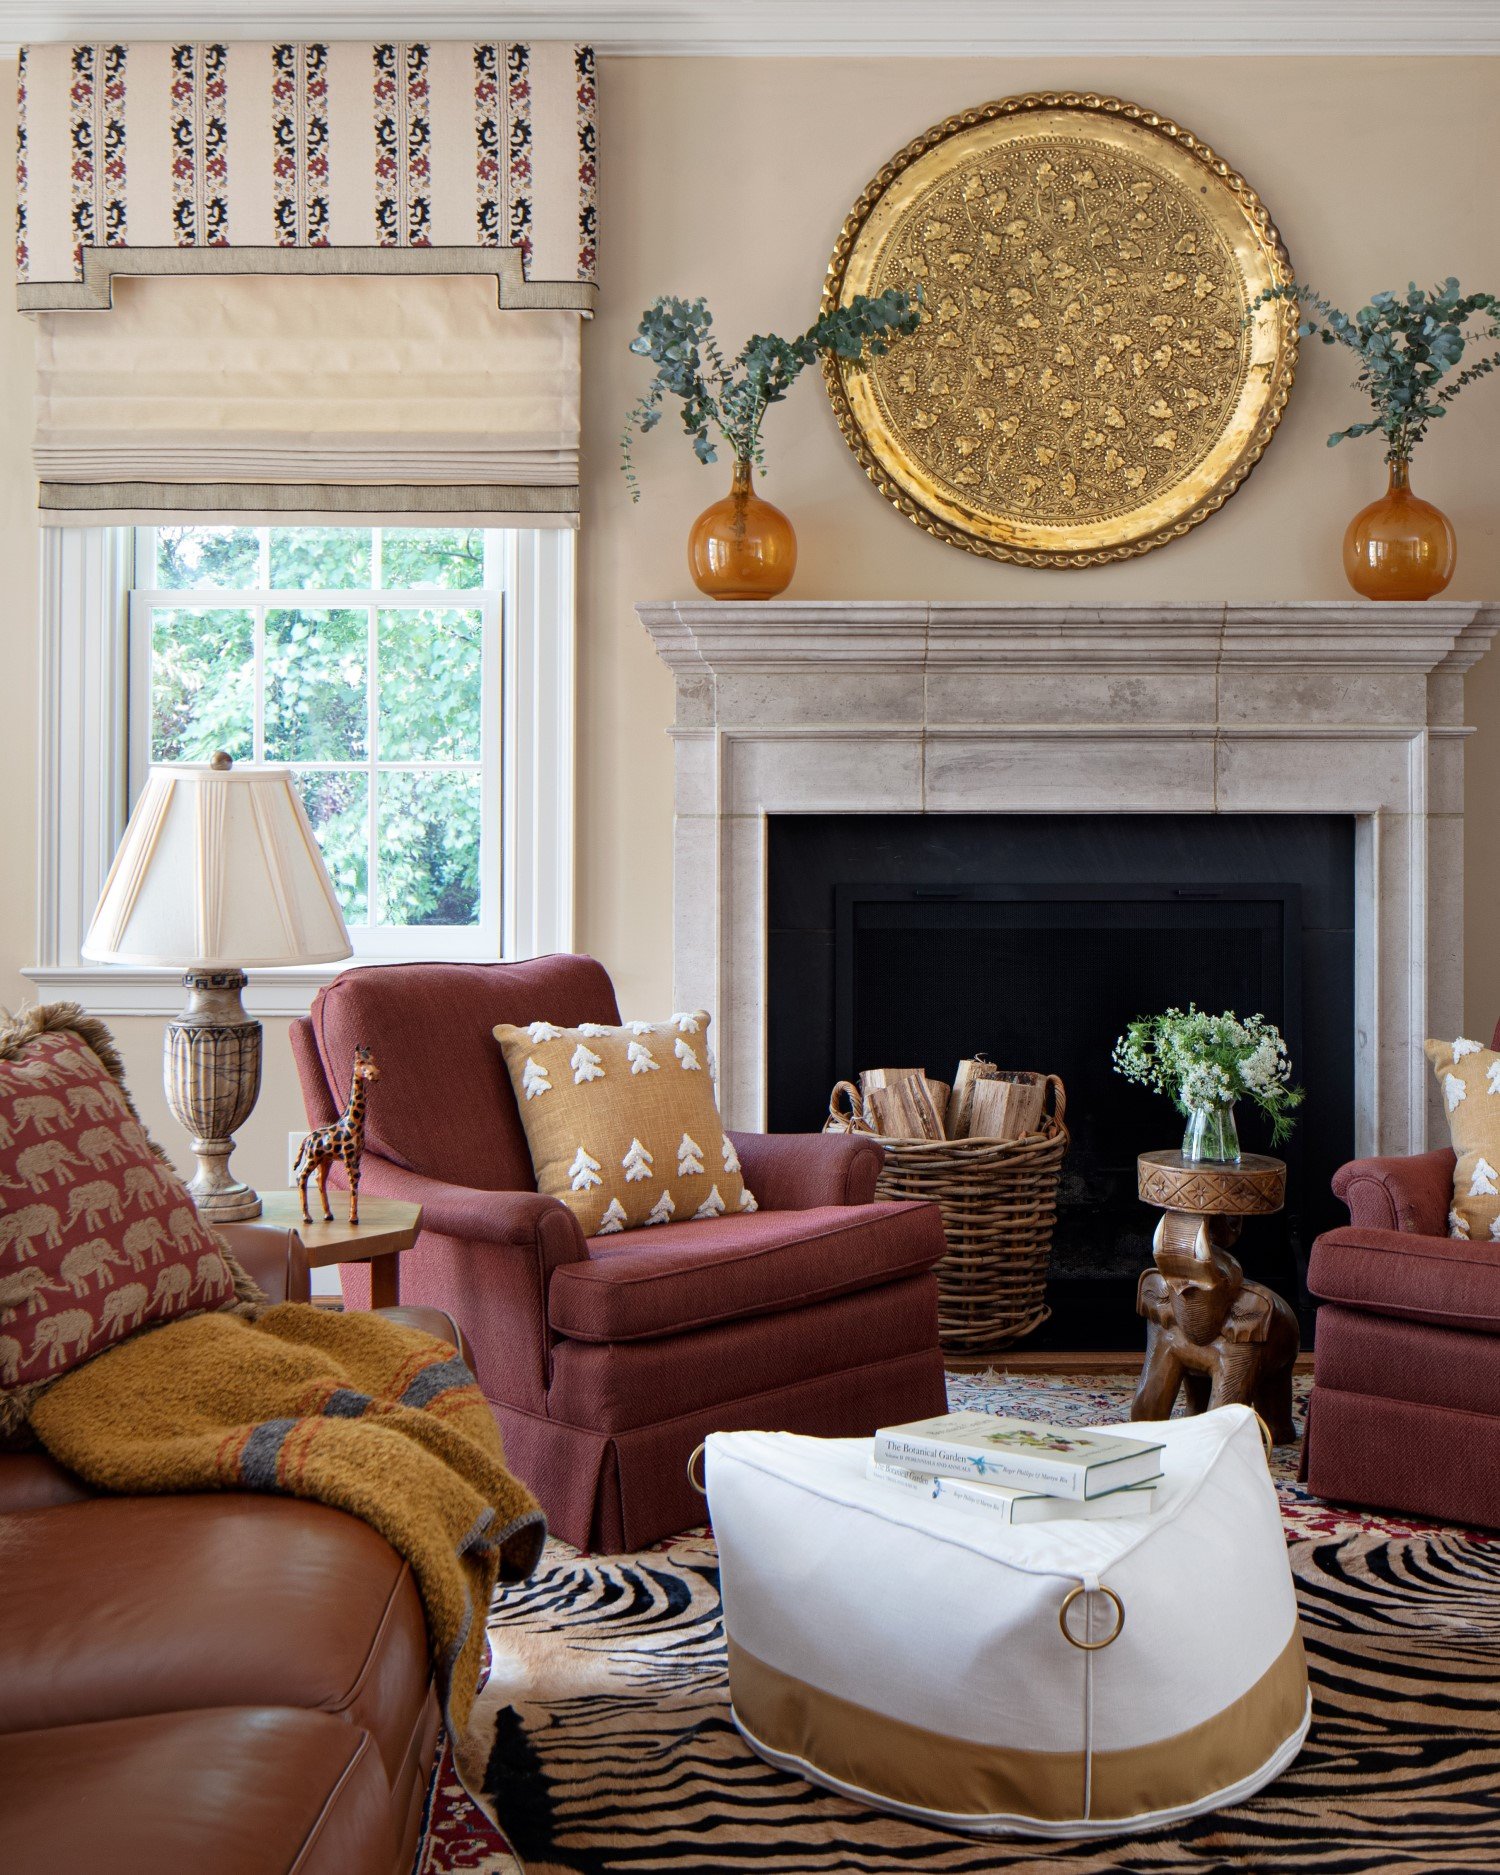  A mix of autumnal hues brought together in this living room by color expert Susan Jamieson brings warmth to the space with its stone fireplace and zebra rug 